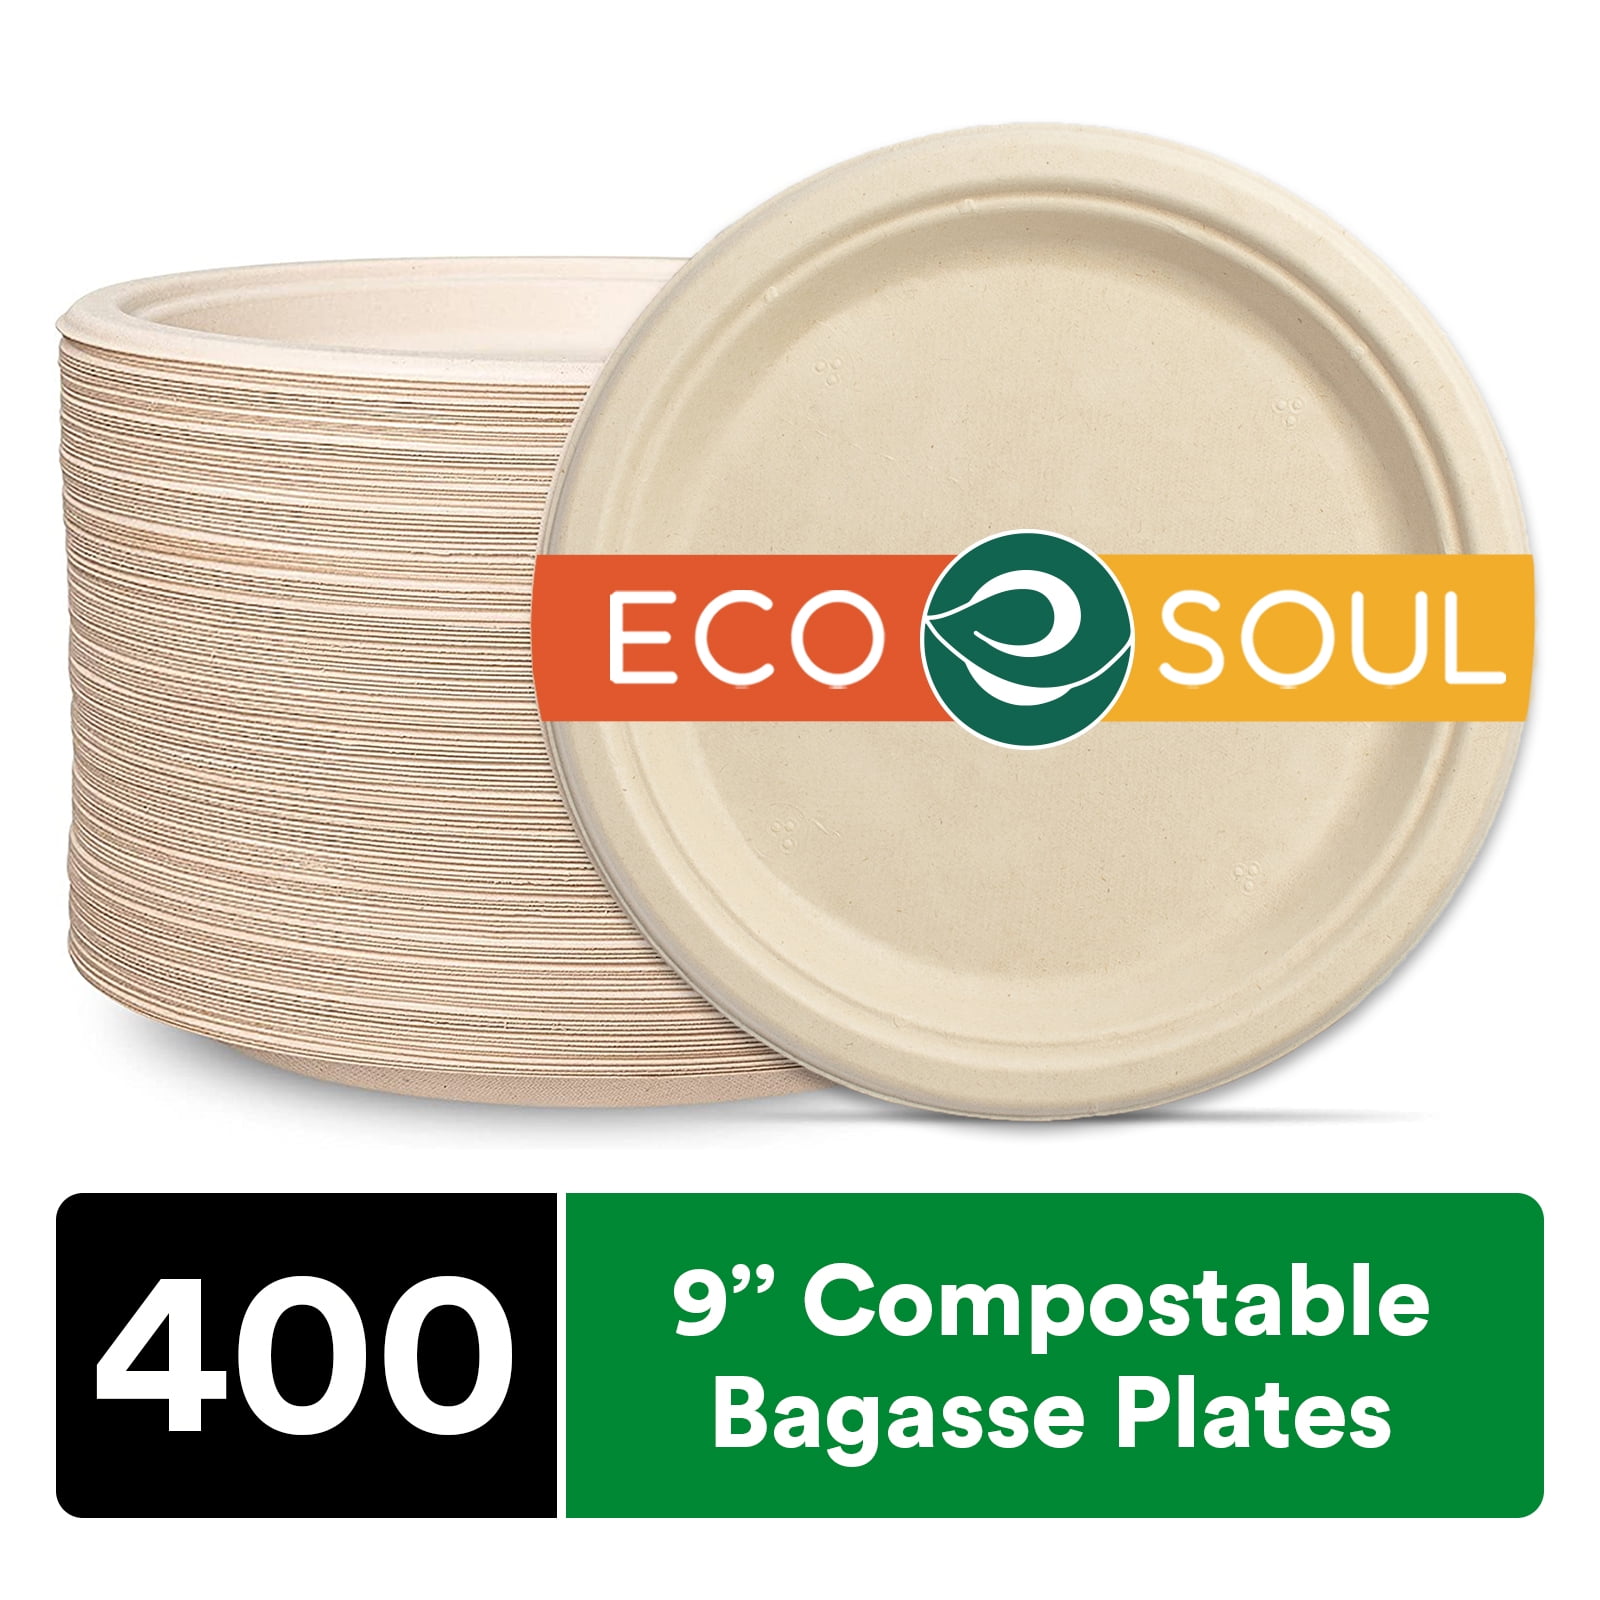 EcoAvance Bulk Paper Plates 9 inch, Disposable Paper Plates 400 Pack, 100% Compostable Plates Eco Friendly Recycled Paper Plates Dinner size, Brown